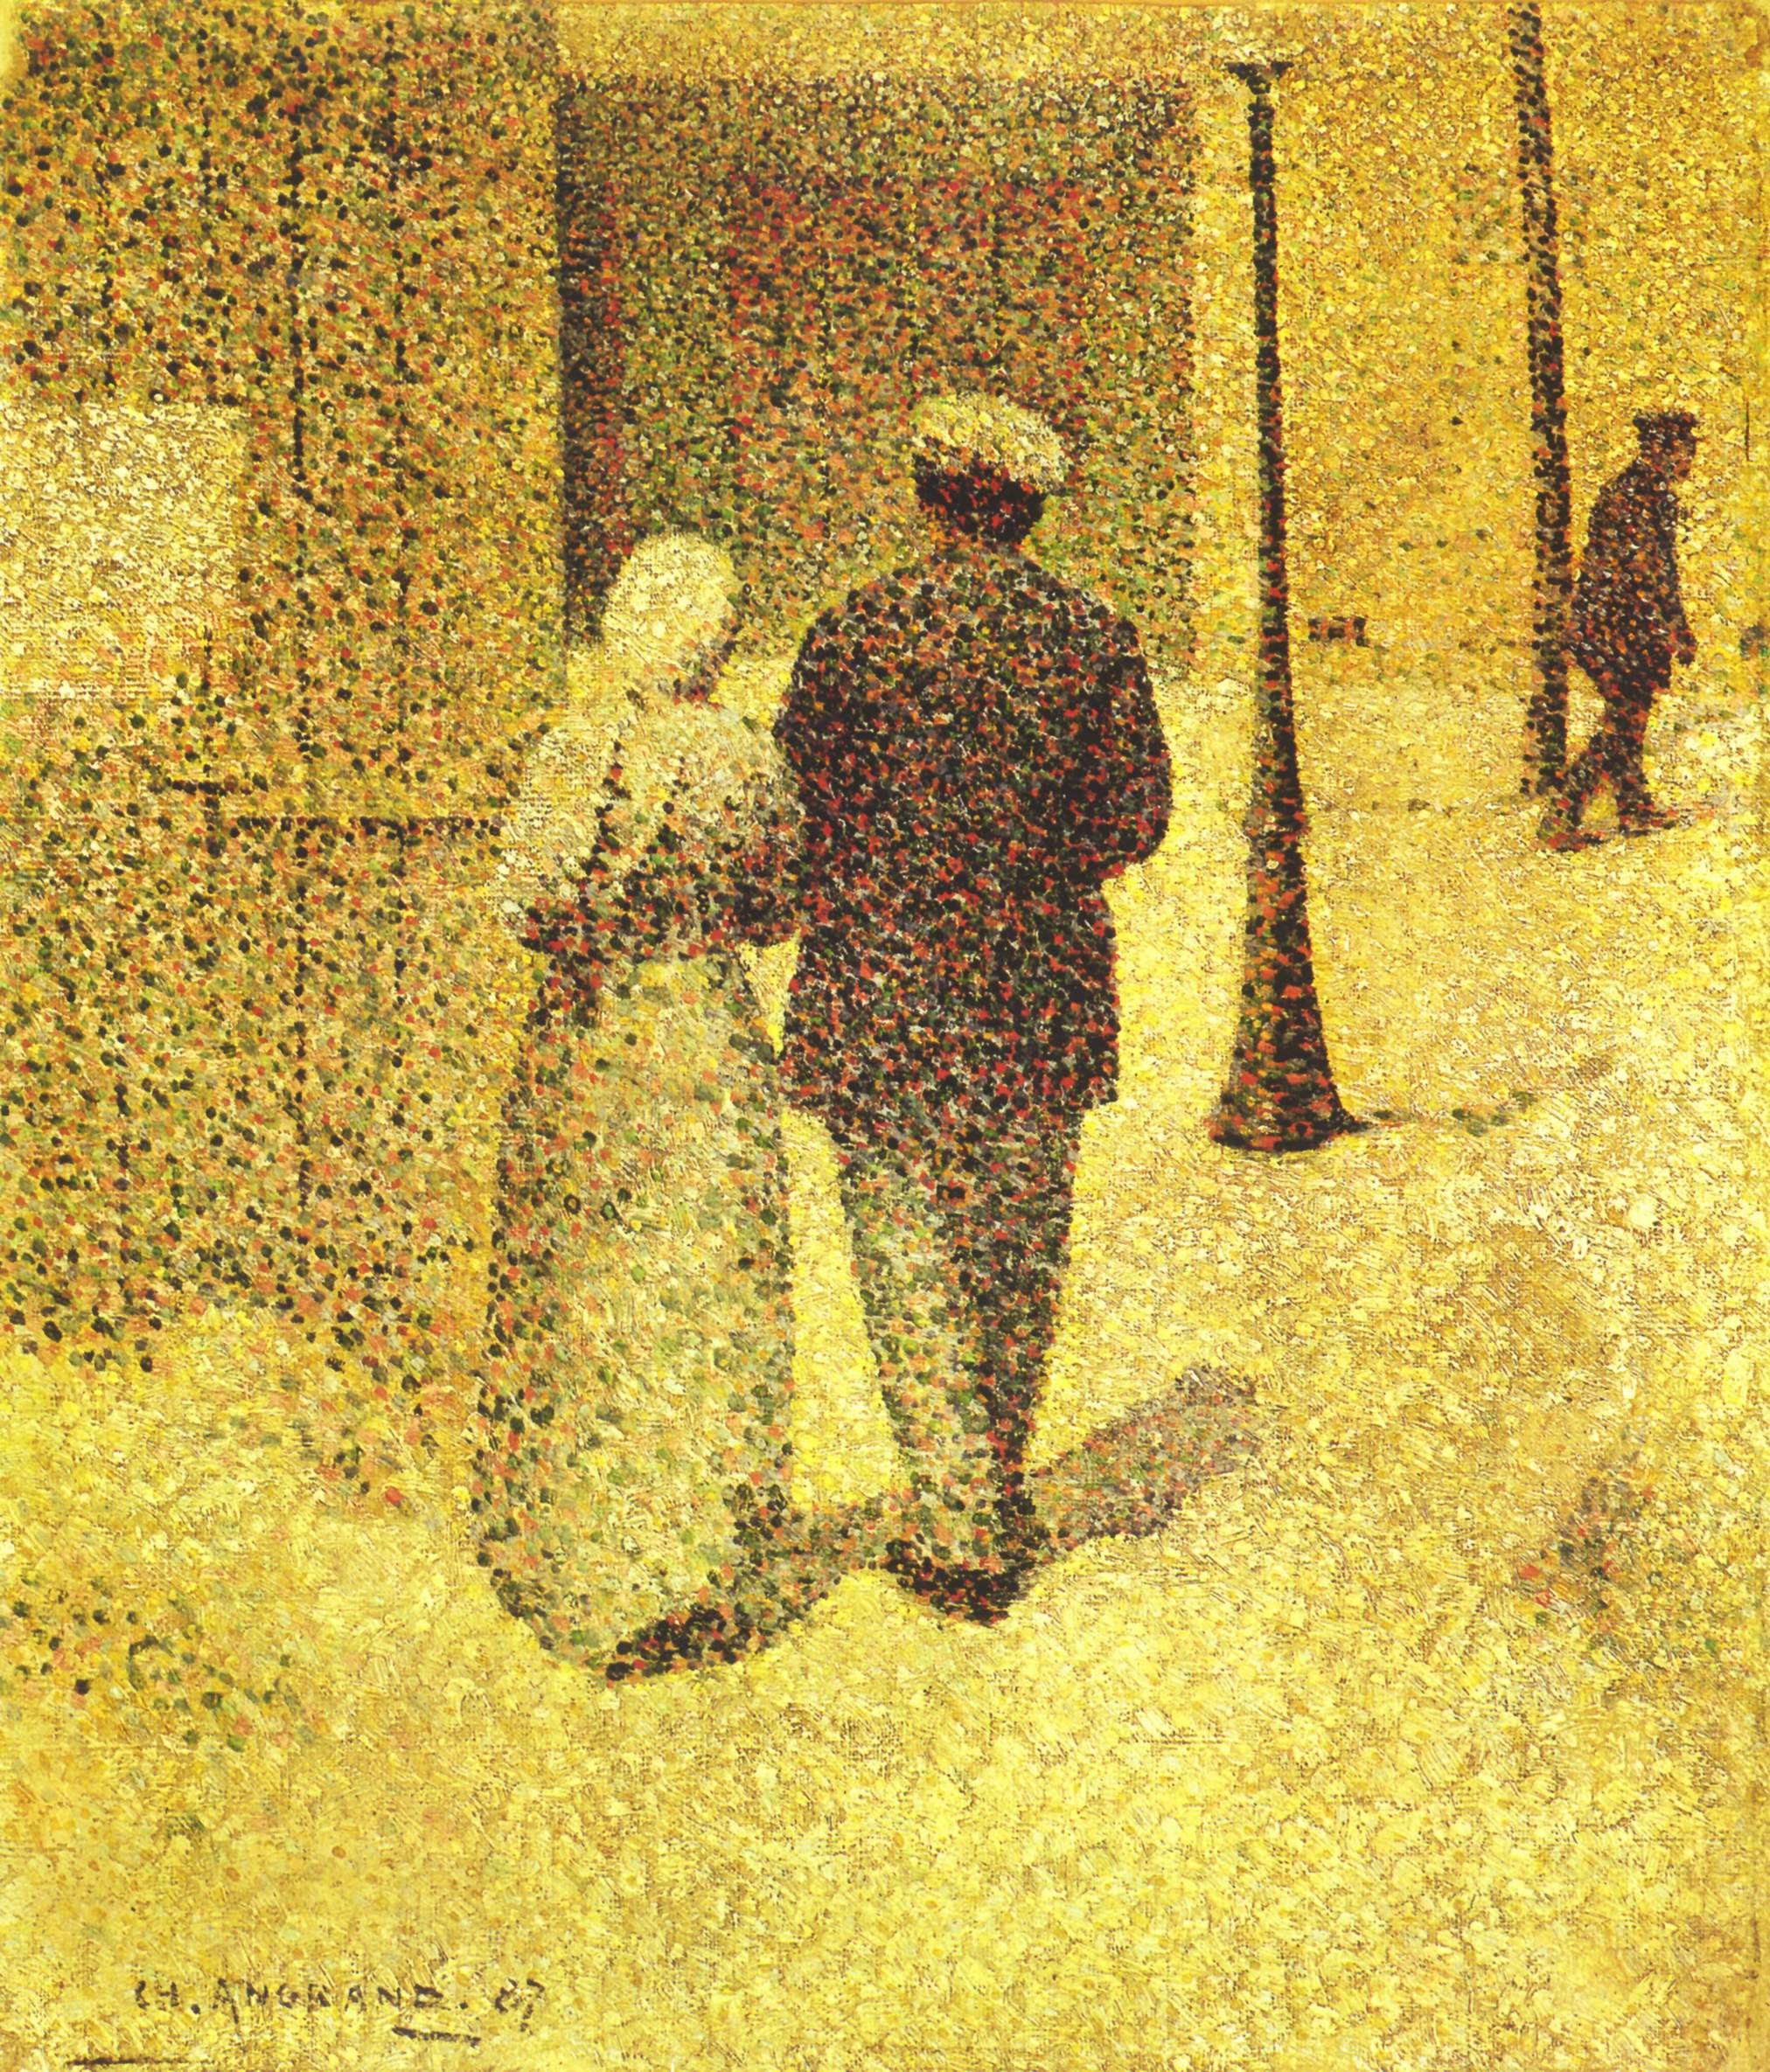 Man and Woman on the Street